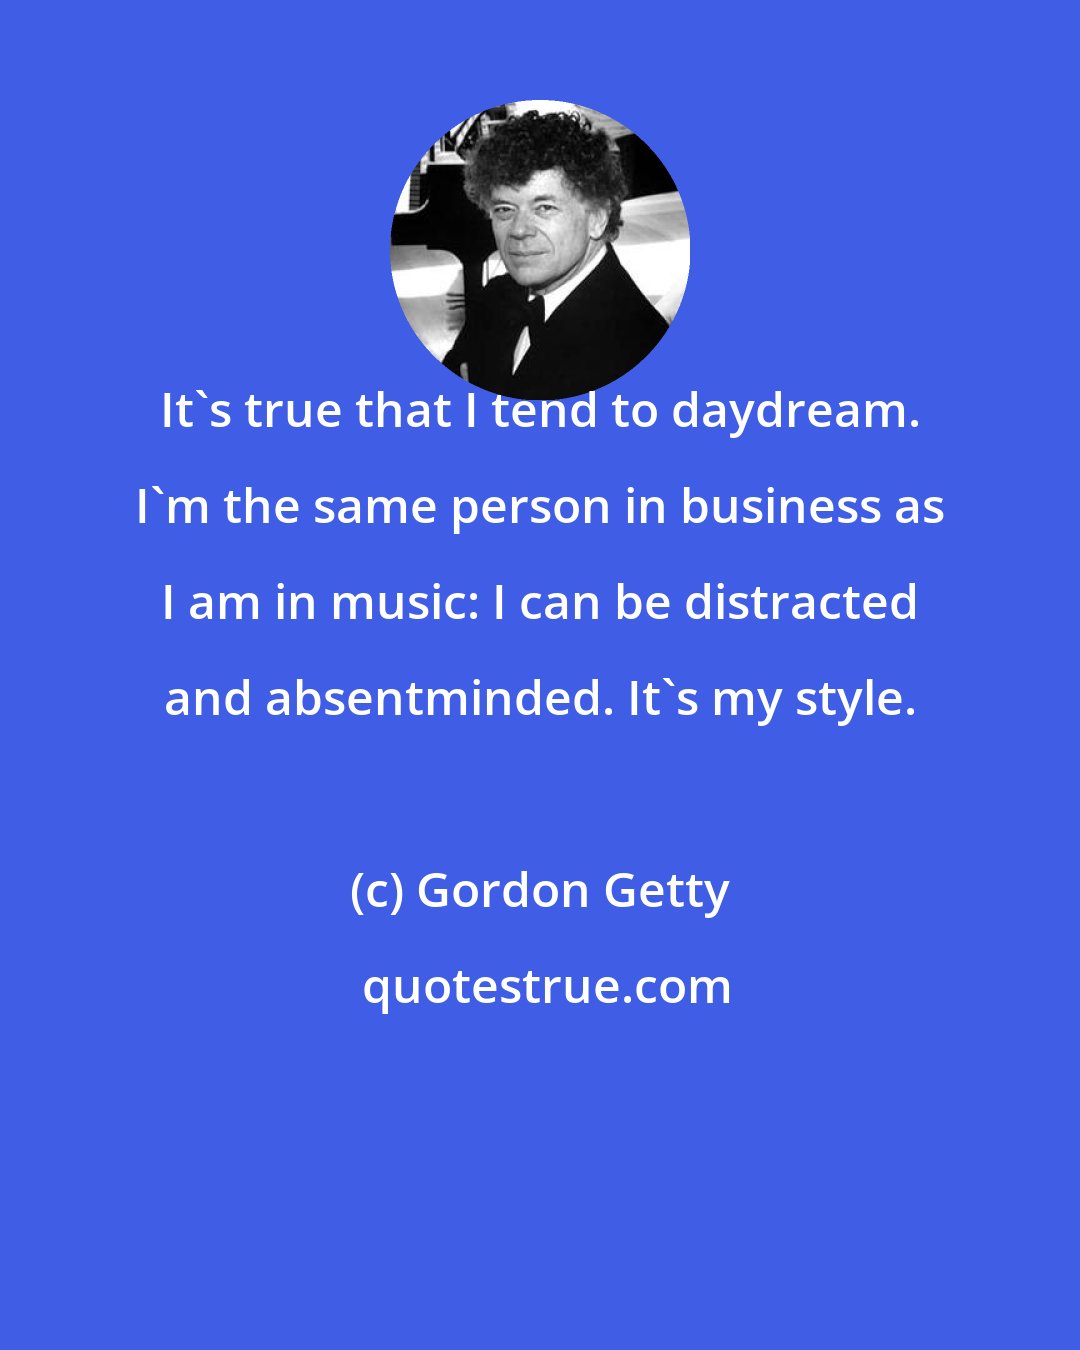 Gordon Getty: It's true that I tend to daydream. I'm the same person in business as I am in music: I can be distracted and absentminded. It's my style.